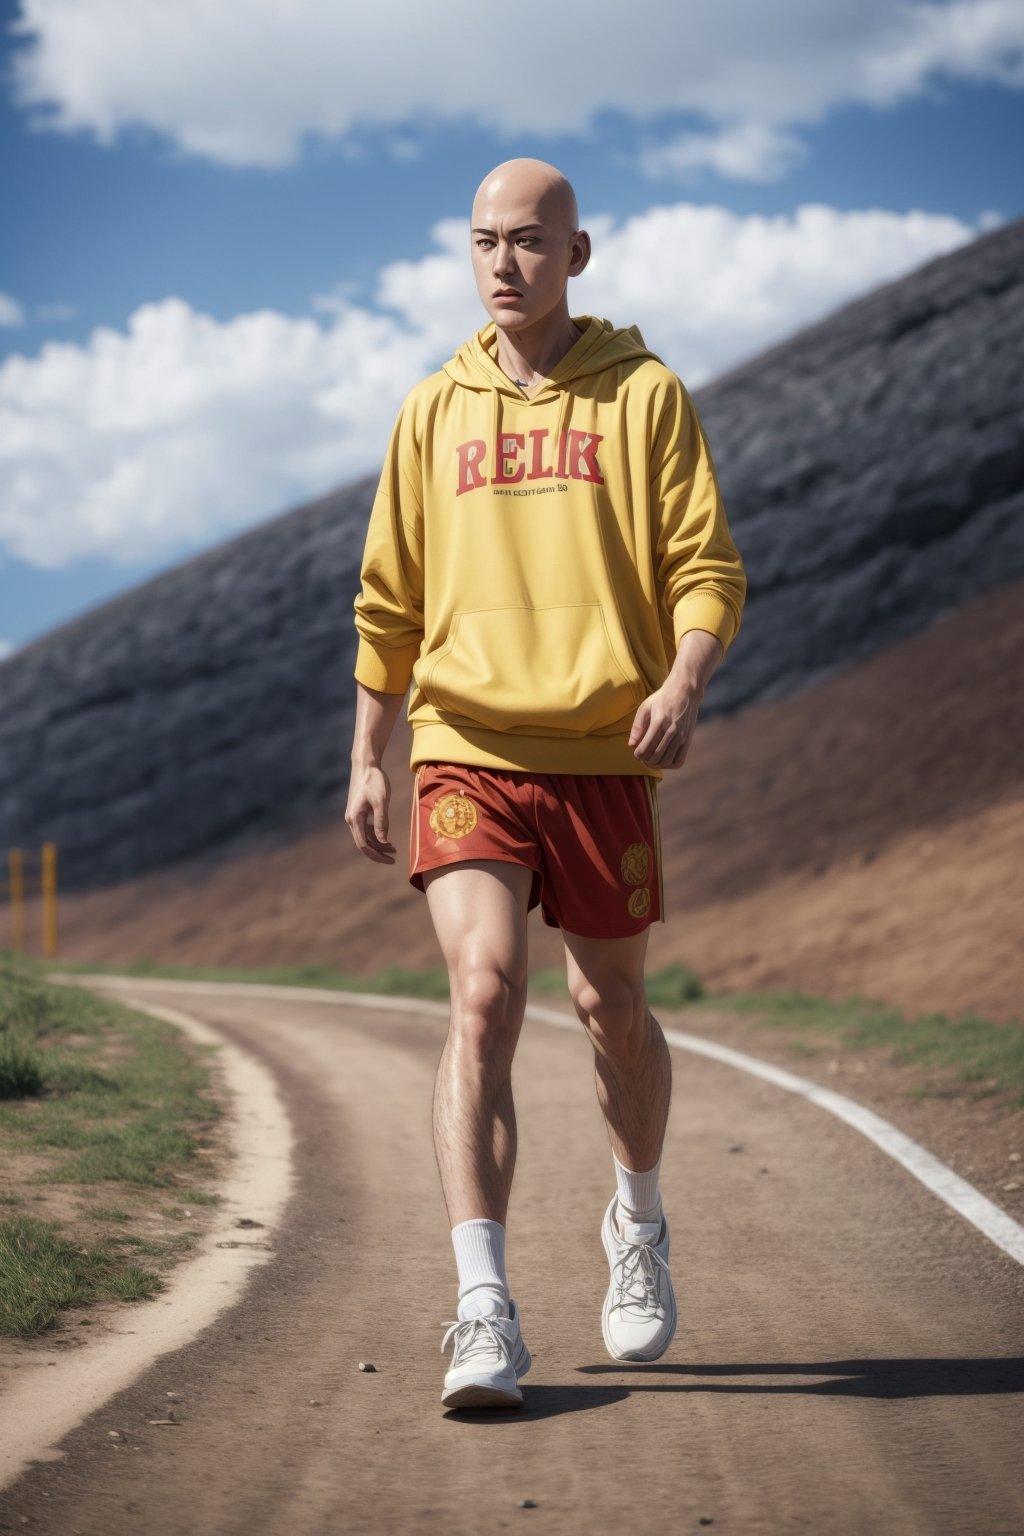 saitama, (photorealistic:1.25), one punch, 1boy, 25-year-old japanese man, ((bald)), (full body:1.52), highly detailed, from below:1.38, (oversize yellow hoodie printed text "OPPAI", red spandex shorts, white socks, sneakers), dynamic pose,  muscular:1.45, masculine:1.13, outdoor,SAITAMA,Detailedface, correct_anatomy, cinematic lighting, dramatic, side view